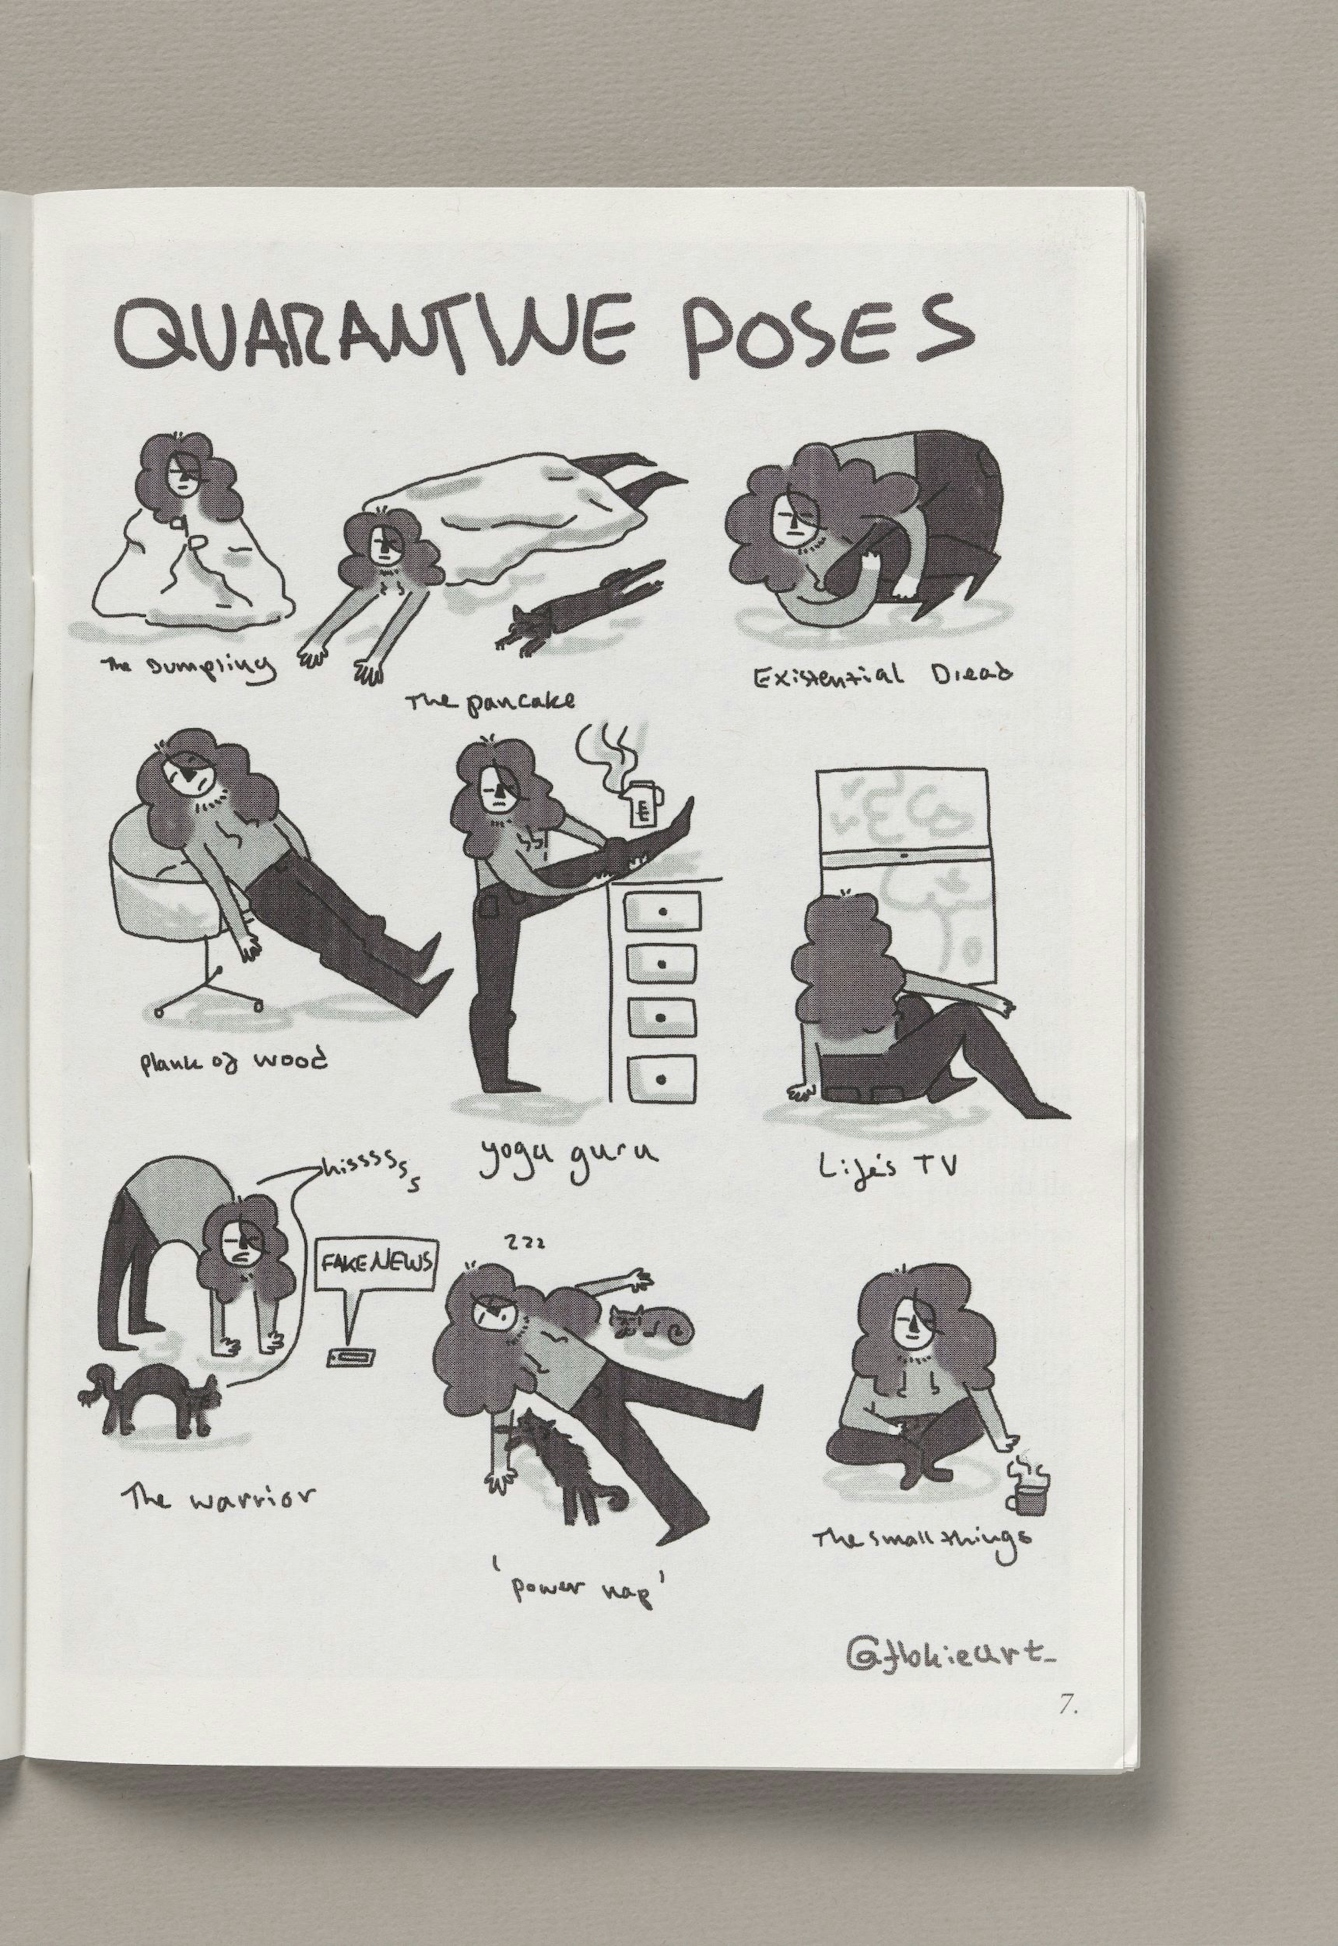 A page from the zine 'Quarantine zine' compiled by Katie Ravenscraig. The page, title 'quarantine poses' depicts a young woman with long curly hair and her cat doing 9 comic poses that capture the quarantine experience. The titles of the 9 poses are: a dumpling (the woman sits wrapped in a duvet), the pancake (the woman and cat lie, arms and legs stretched under a duvet), existential dread (the woman and cat are curled up in a ball), plank of wood (the woman leans back rigid like a plank against a swivel chair), yoga guru (the woman stands on leg raised on top of a filing cabinet), life's TV (the woman sits gazing out of a window), the warrior (the woman and cat are on all fours, backs arched, hissing at a mobile phone with the speech bubble coming out of it that says "fake news"), power up (thw woman lies on the floor, arms and legs apart with a cat lying under each arm) and the small things (the woman sits cross-legged on the floor, reaching for a mug with a steaming drink in it).